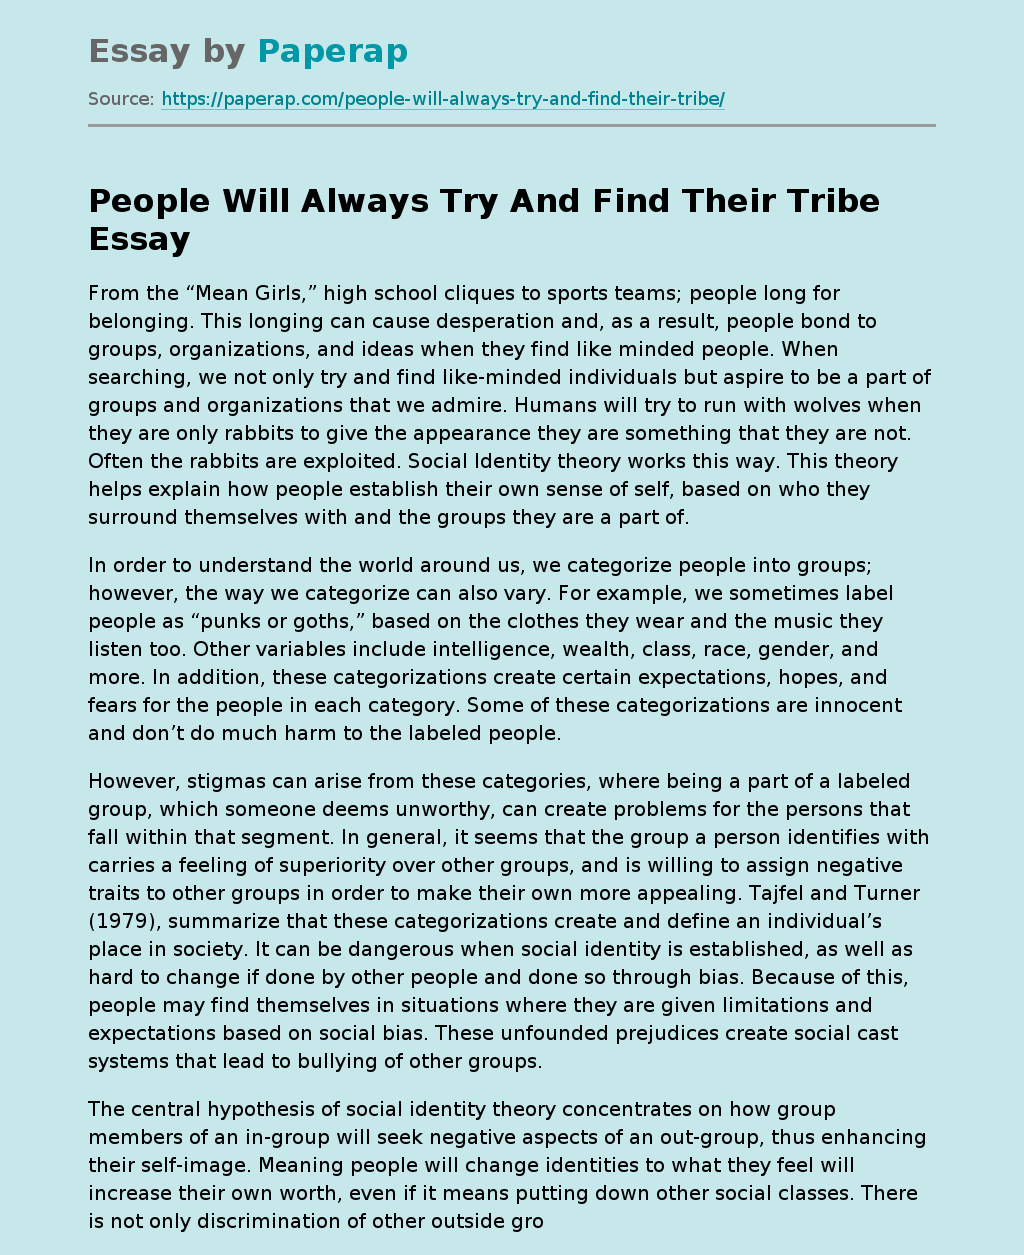 People Will Always Try And Find Their Tribe